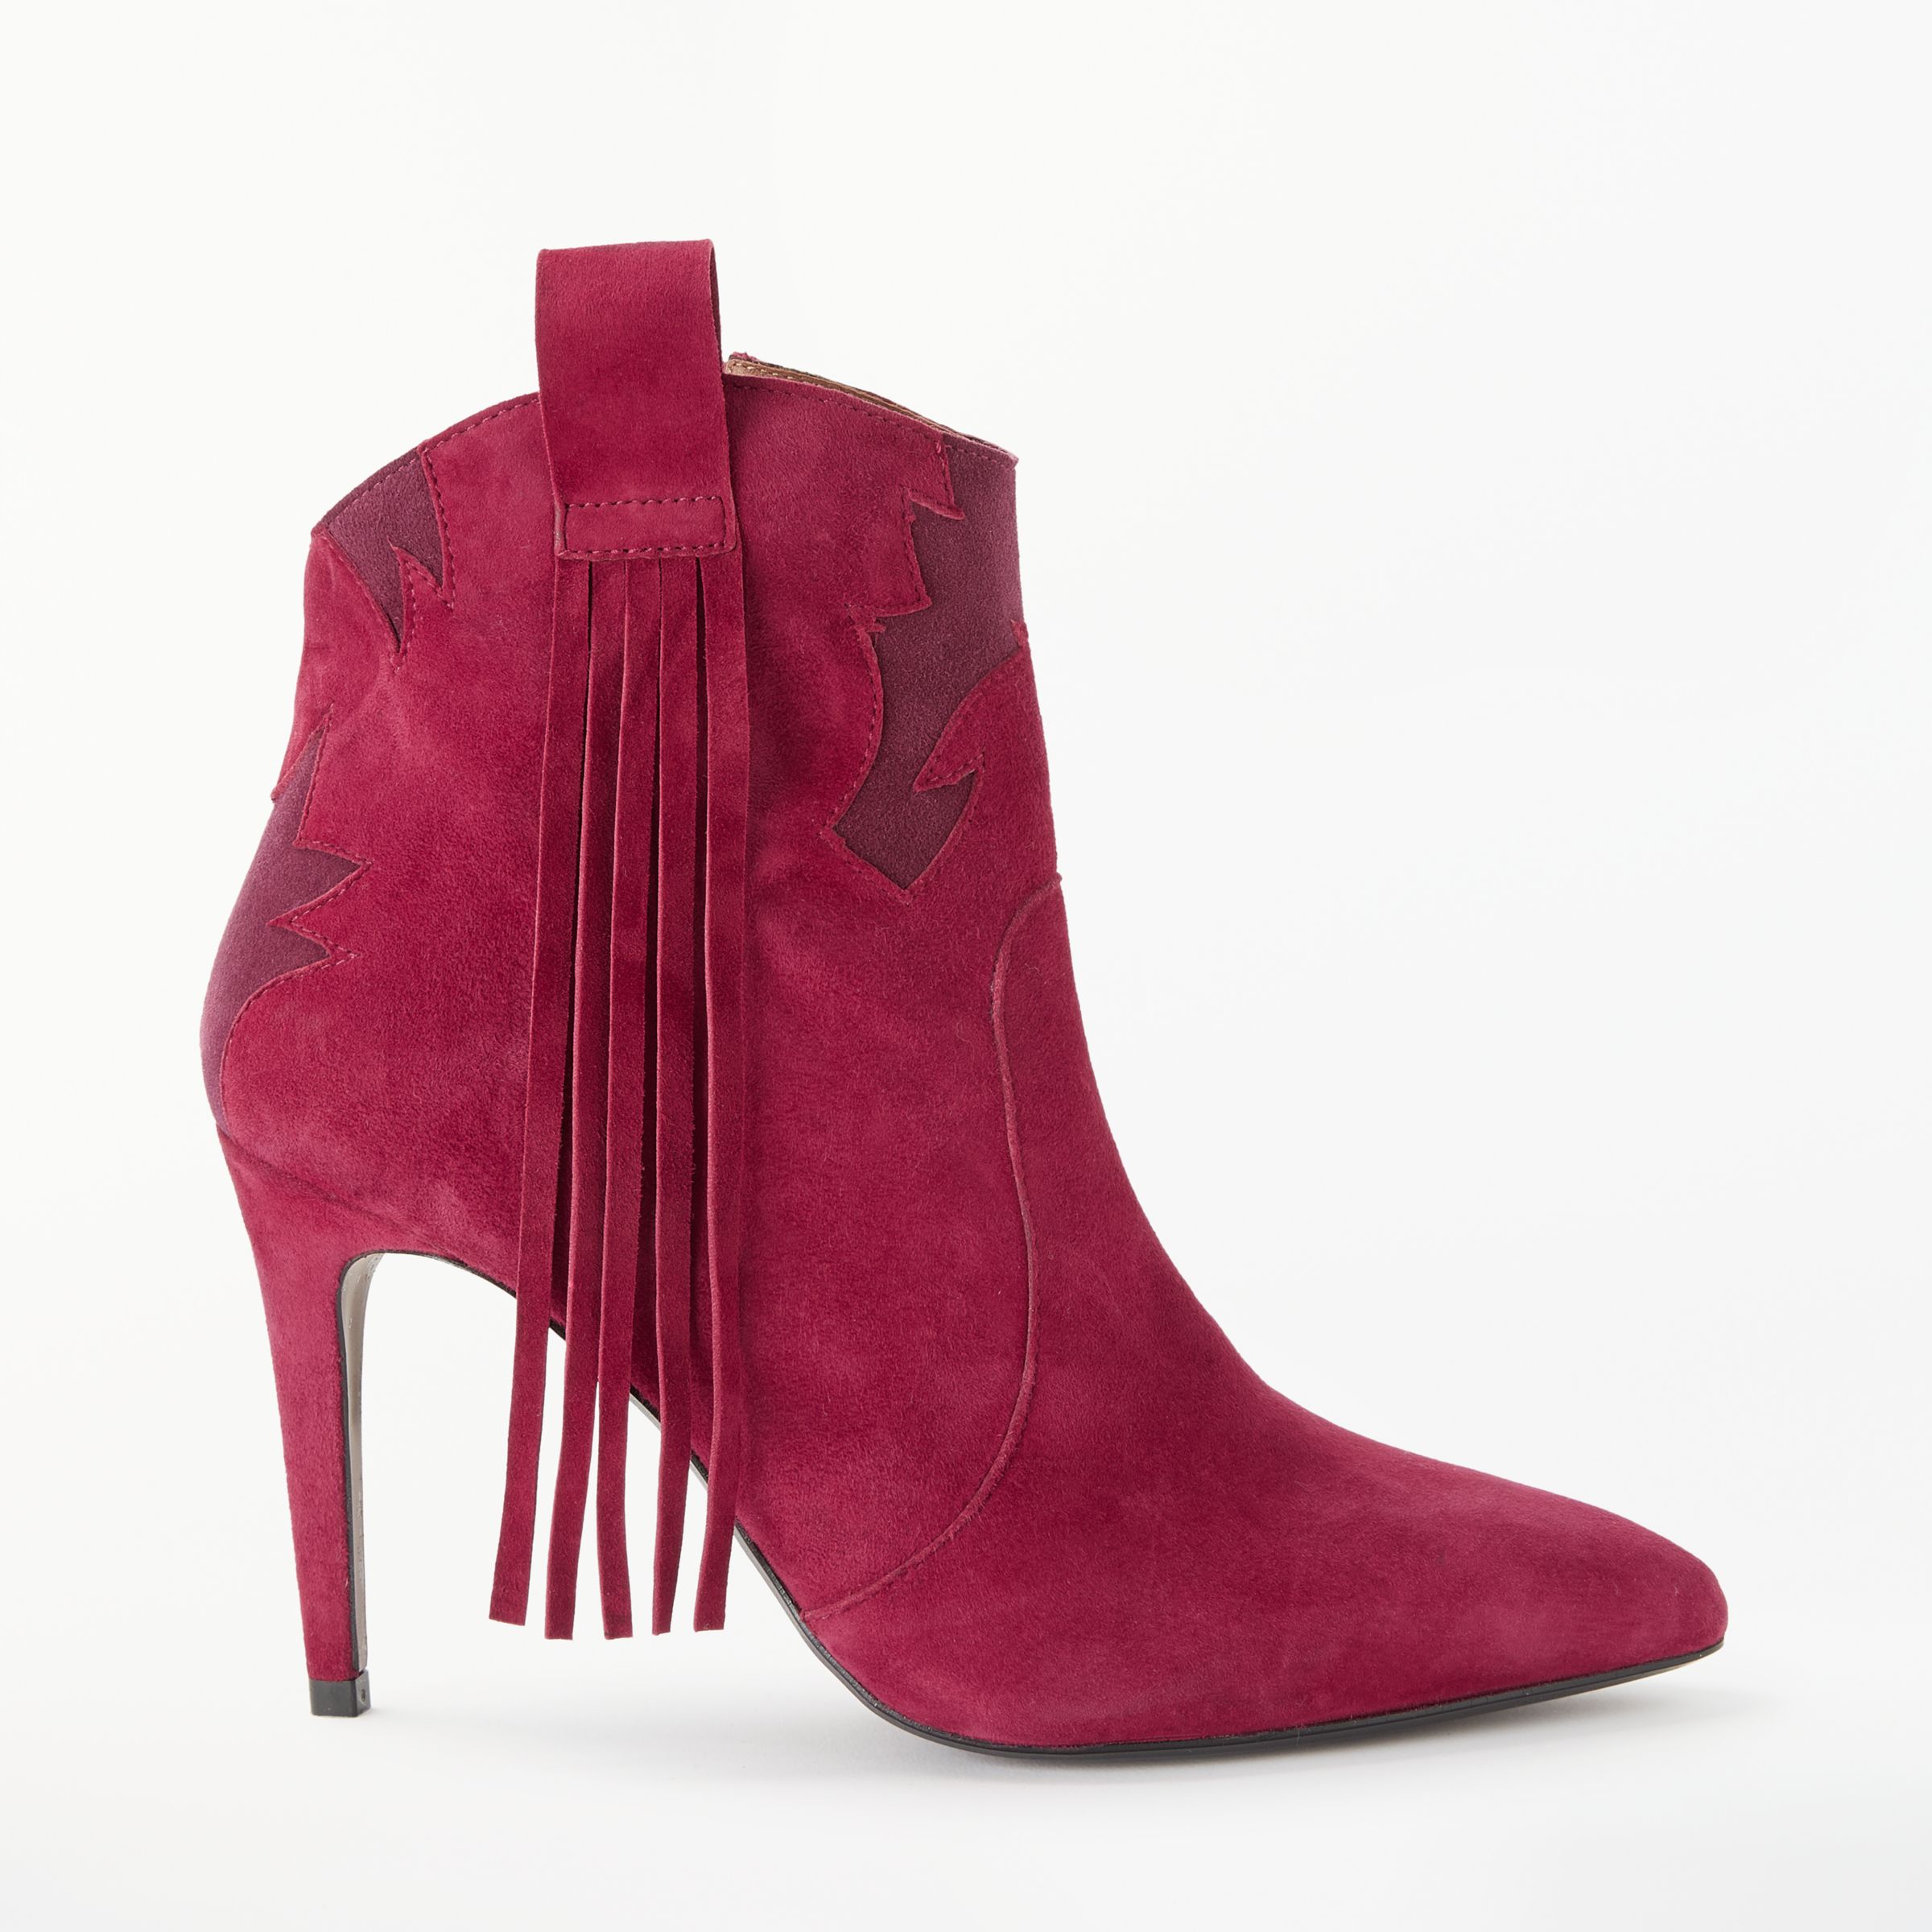 AND/OR Orline Fringe Detail Stiletto Heel Boots, Pink Suede